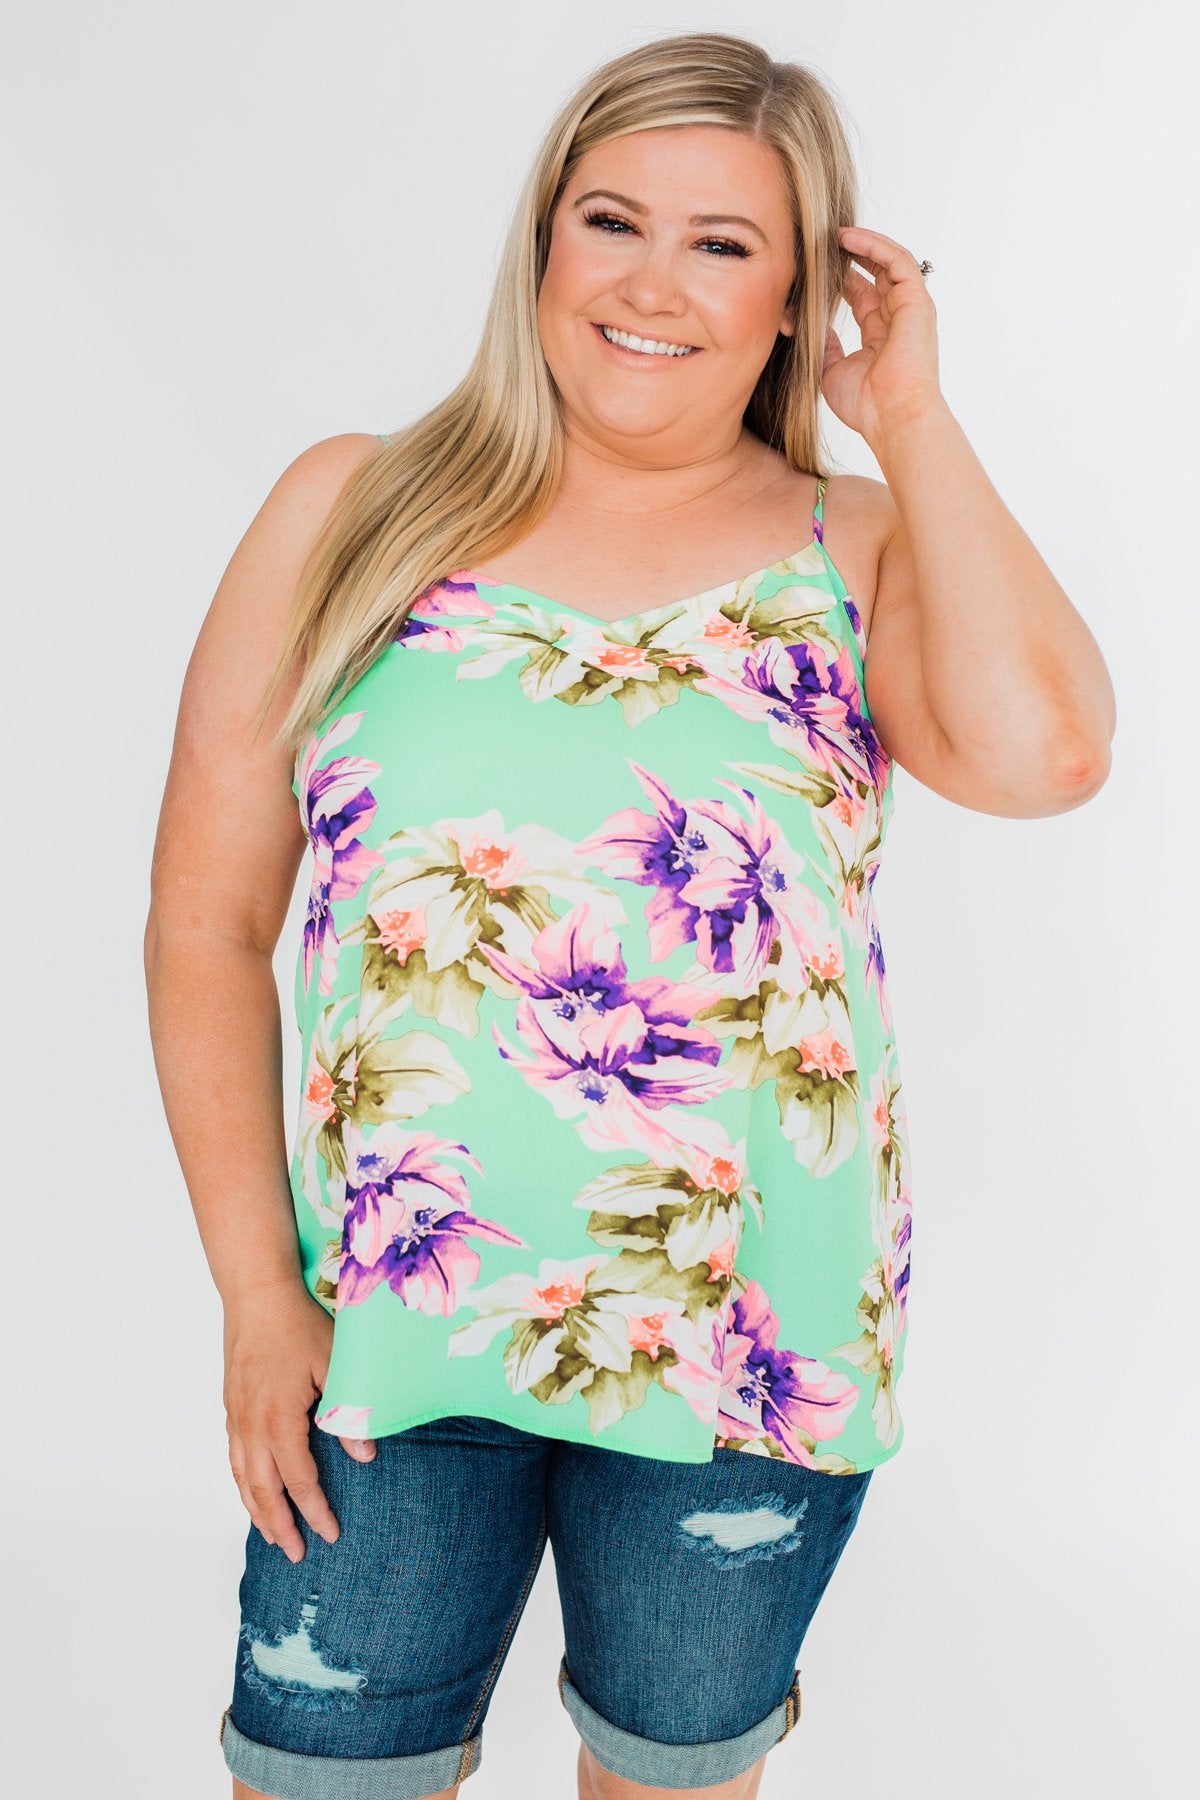 Leave You Speechless Floral Tank Top- Bright Mint